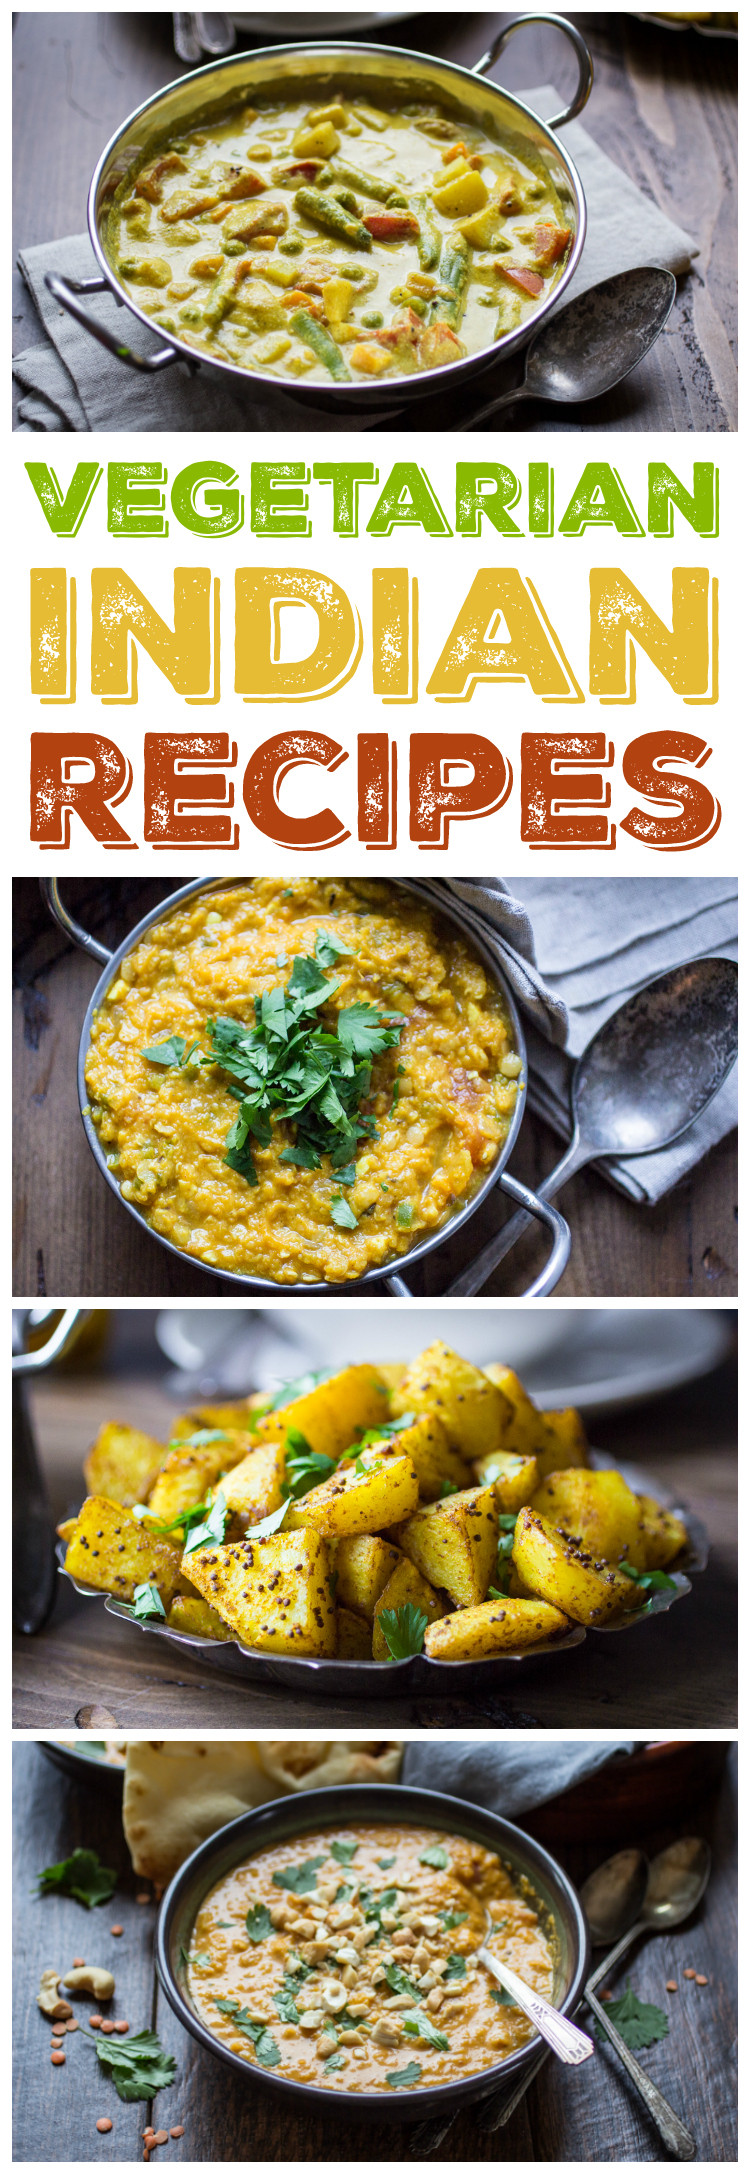 Vegetarian Indian Food Recipes
 10 Ve arian Indian Recipes to Make Again and Again The